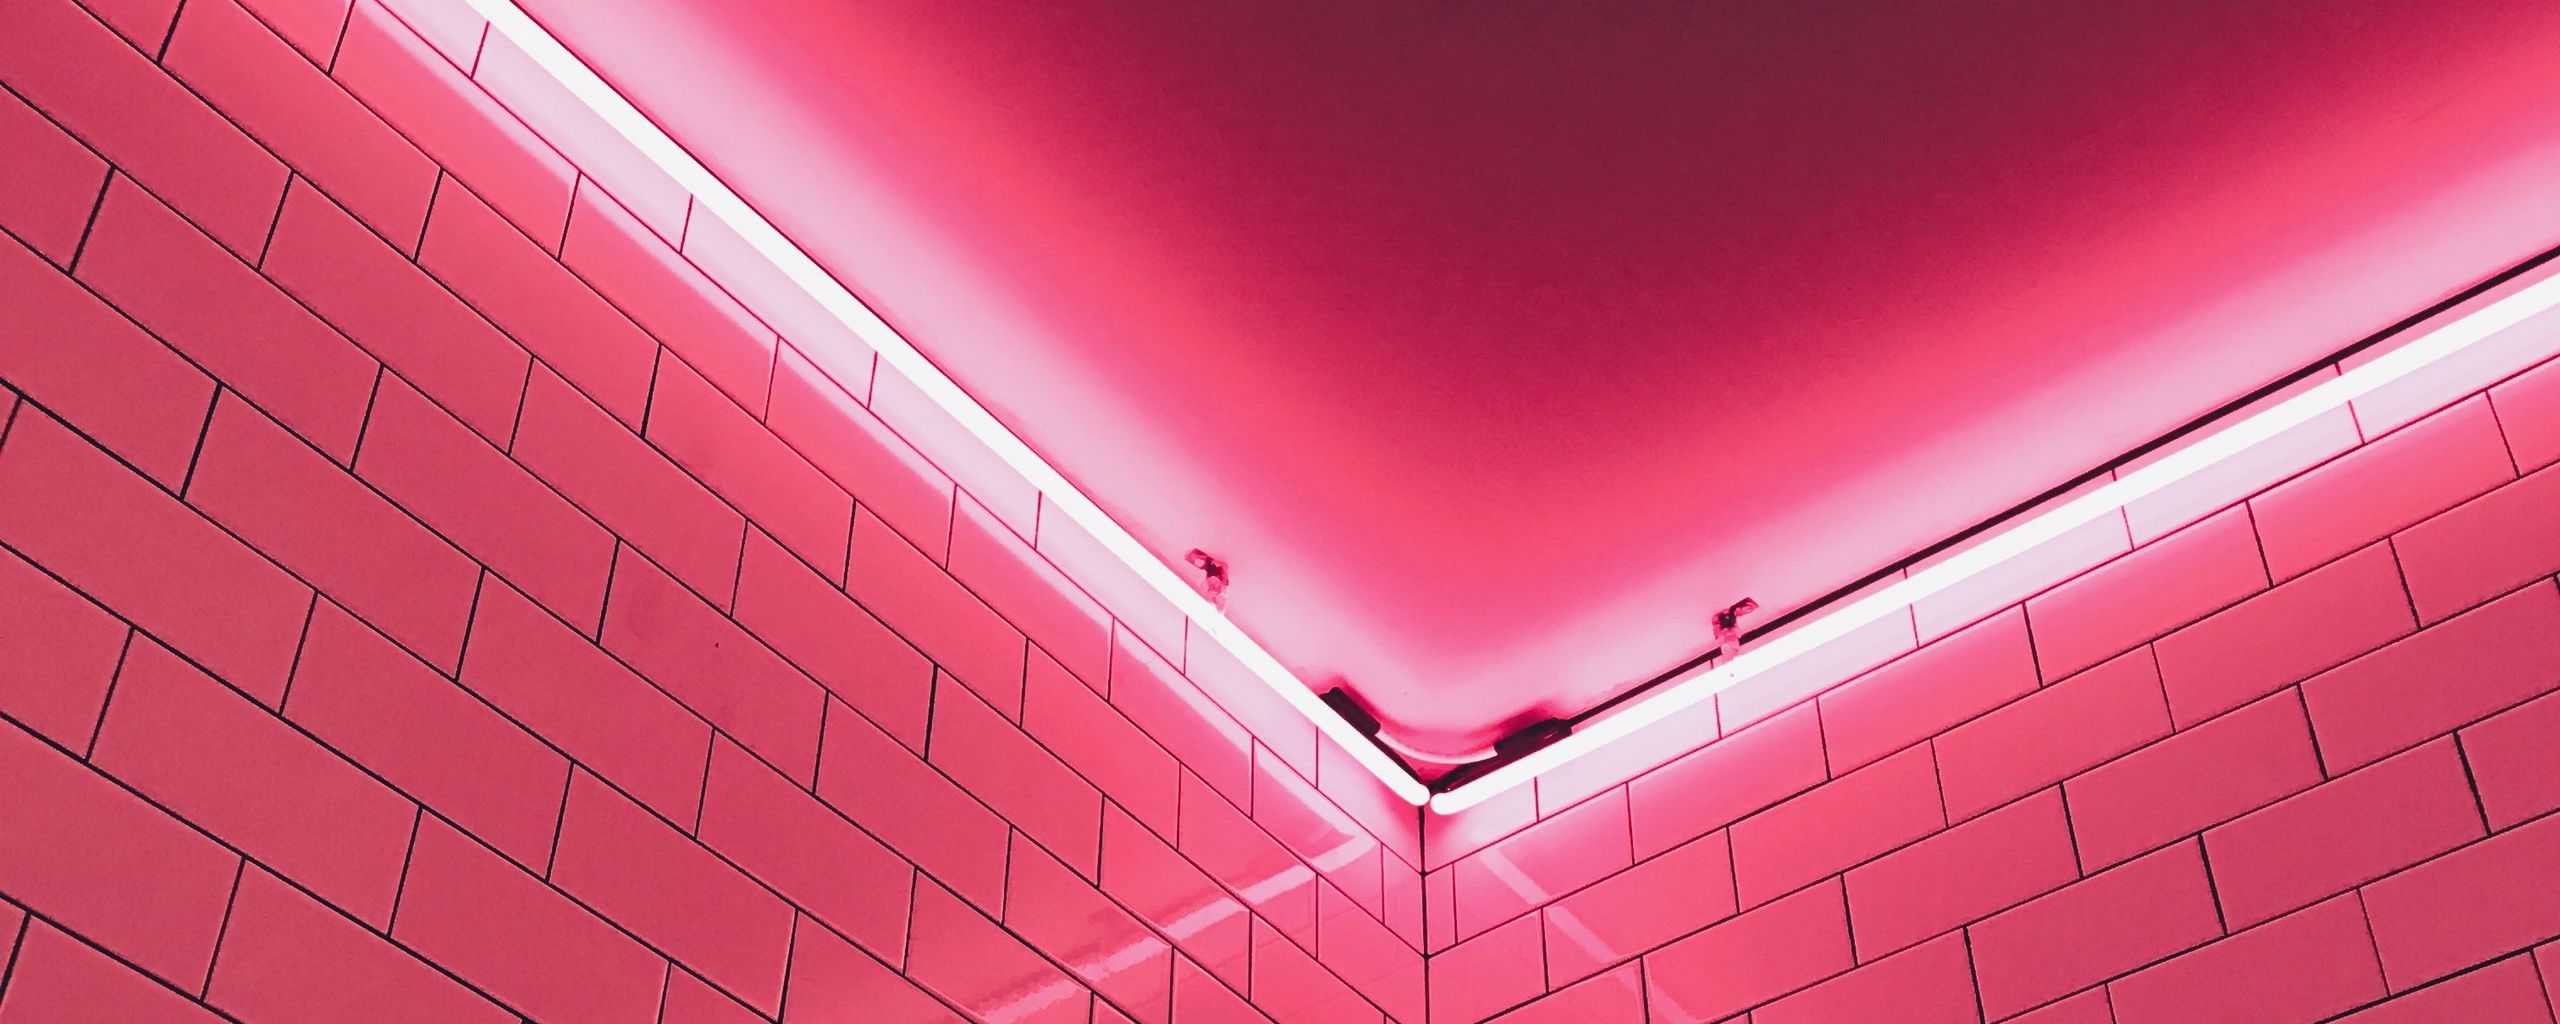 Download wallpaper 2560x1024 wall, light, pink, tile ultrawide monitor HD background